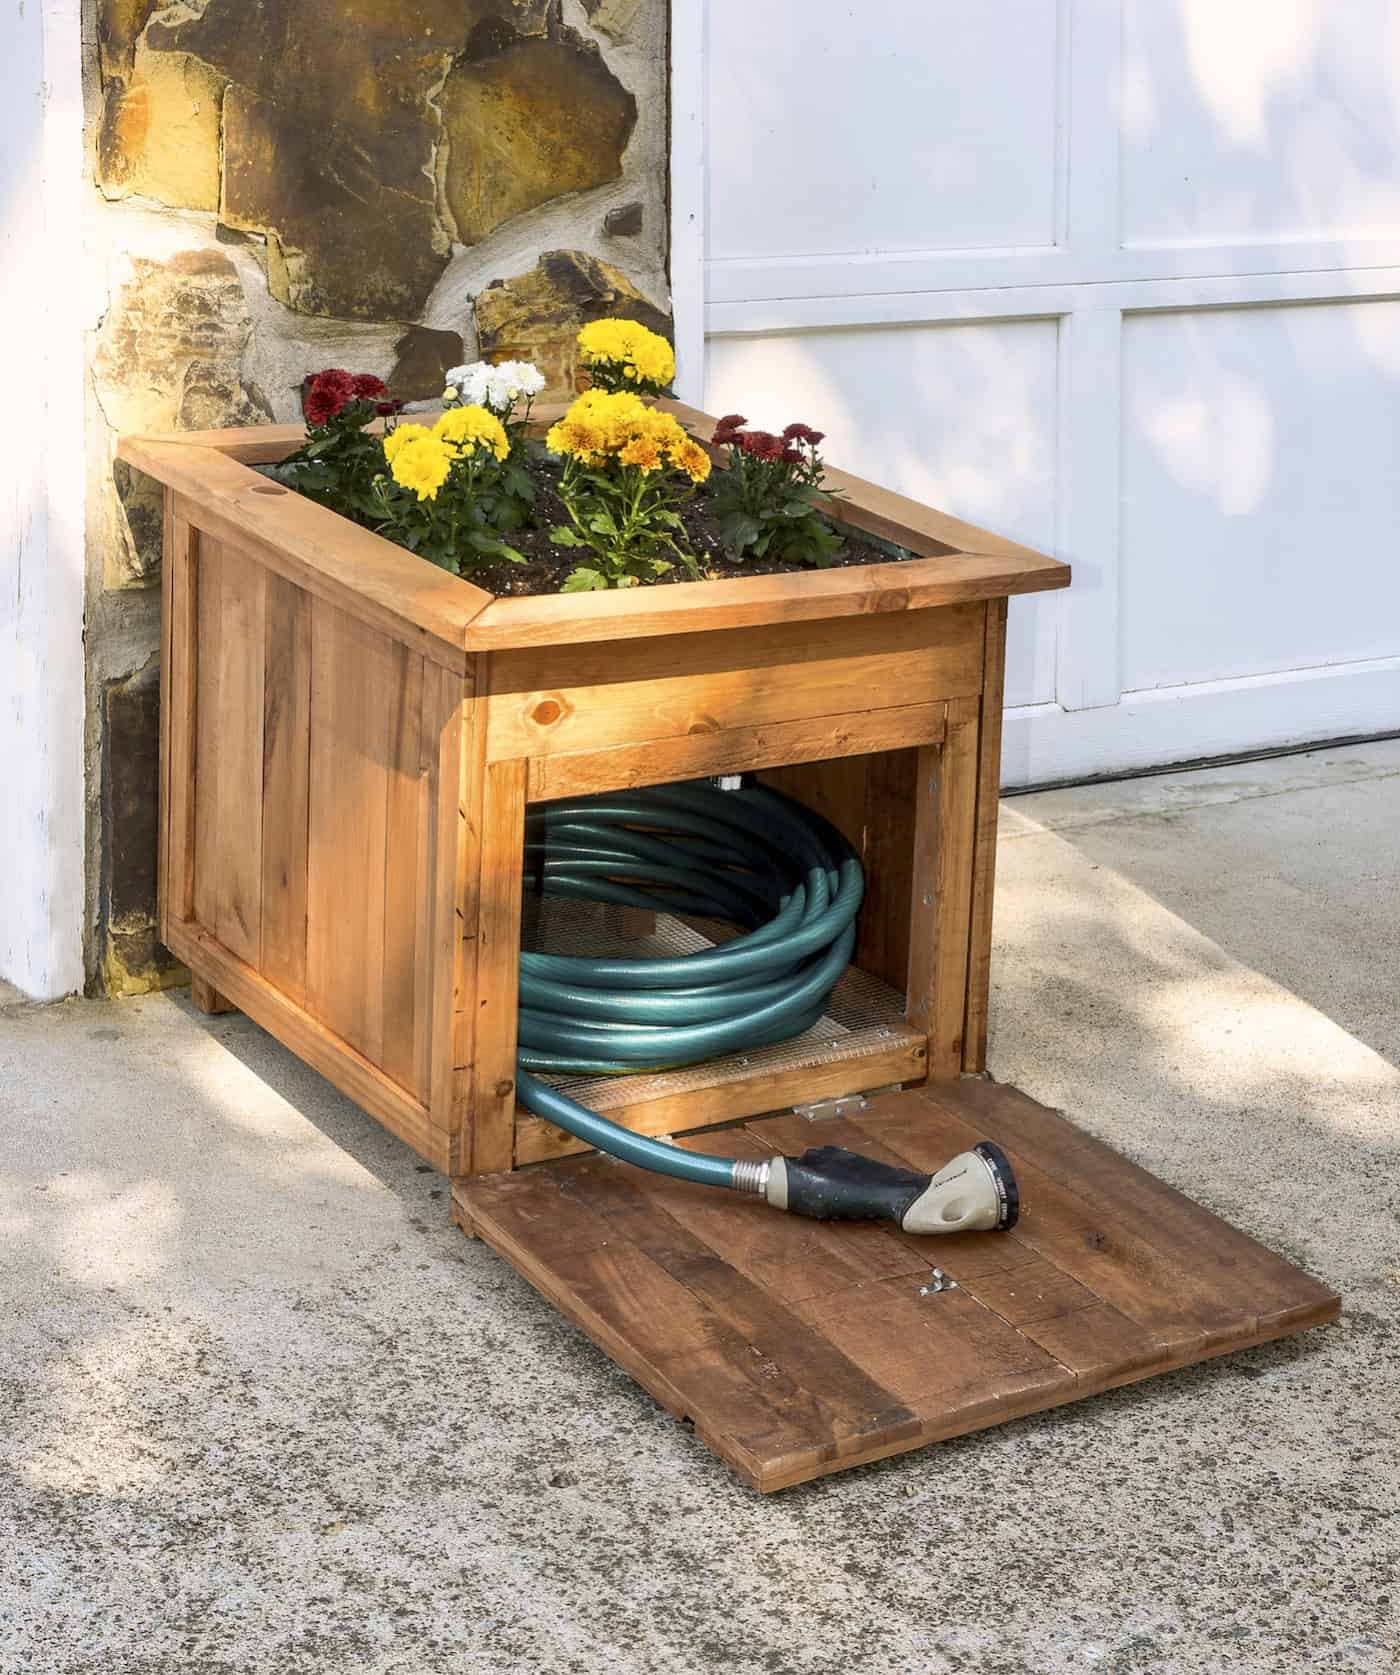 Build a unique hose holder using recycled pallet wood! This holder has a special feature; you can plant your favorite flowers on top. I love it!